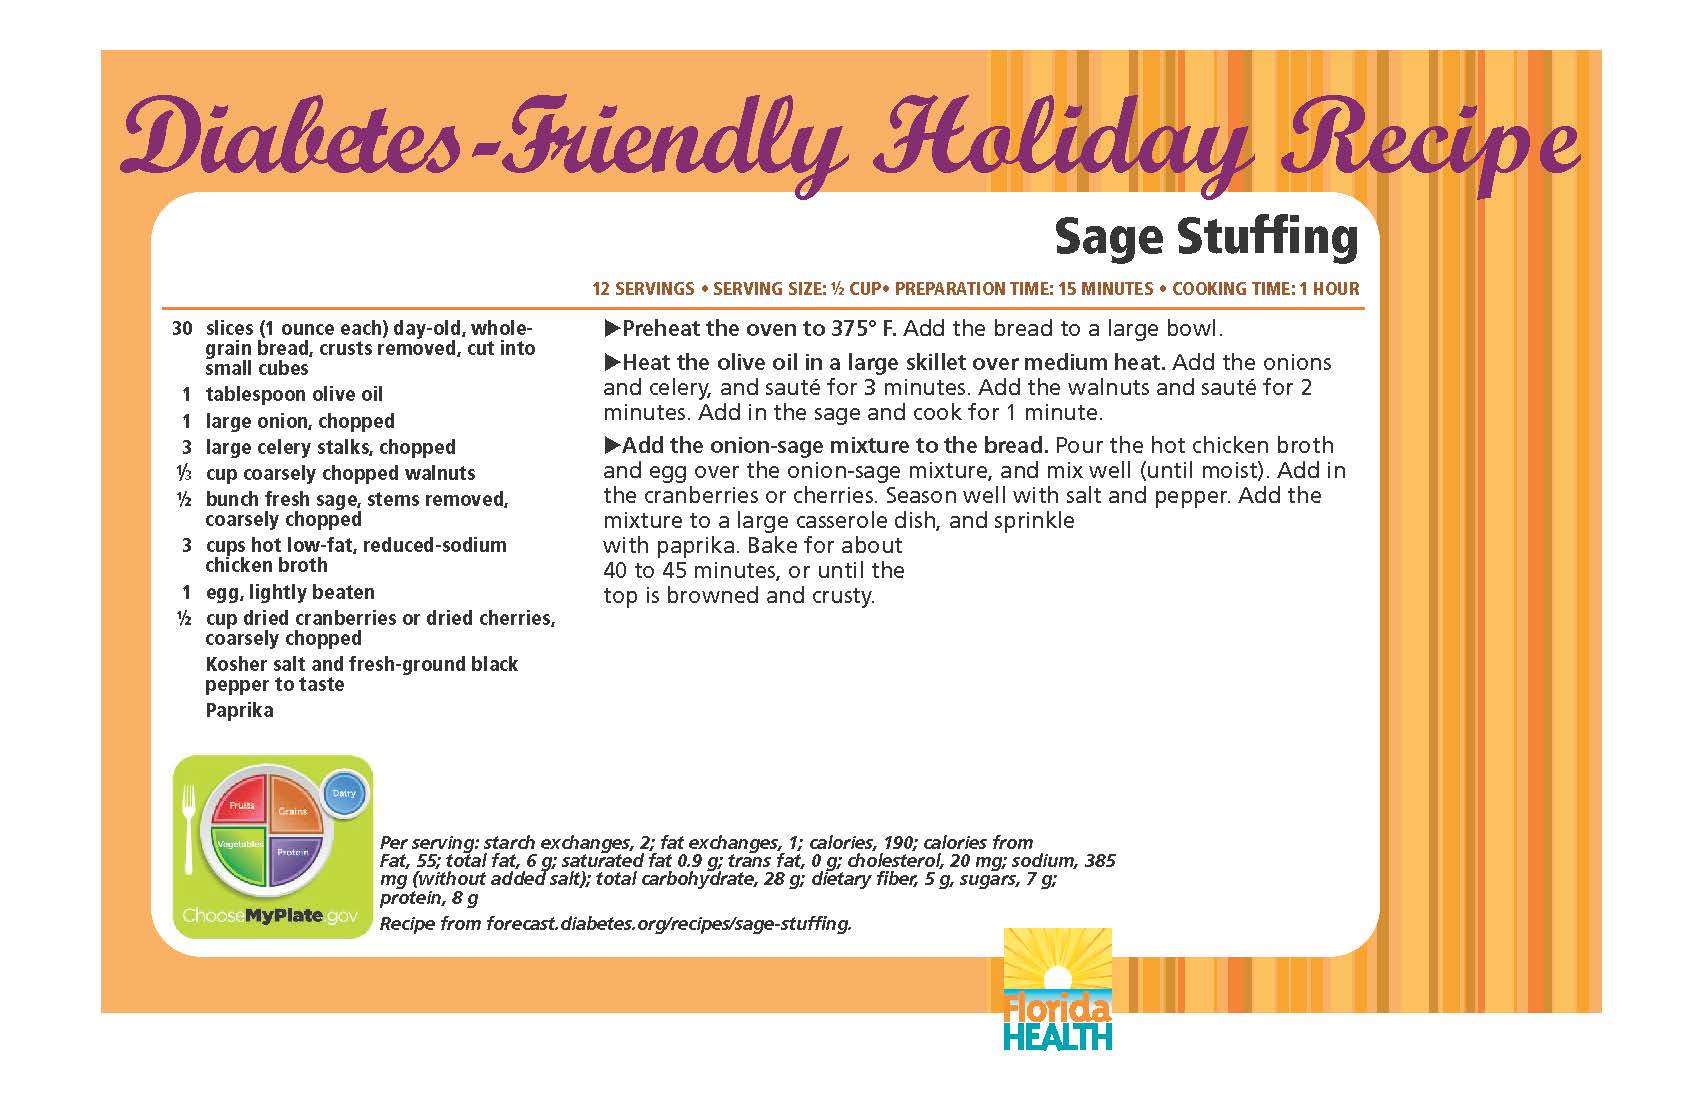 Diabetes-Friendly Holiday Recipe Sage Stuffing 12 servings • serving size: ½ cup• preparation time: 15 minutes • cooking time: 1 hour 30 slices (1 ounce each) day-old, wholegrain bread, crusts removed, cut into small cubes 1 tablespoon olive oil 1 large onion, chopped 3 large celery stalks, chopped 1⁄3 cup coarsely chopped walnuts ½ bunch fresh sage, stems removed, coarsely chopped 3 cups hot low-fat, reduced-sodium chicken broth 1 egg, lightly beaten ½ cup dried cranberries or dried cherries, coarsely chopped kosher salt and fresh-ground black pepper to taste paprika Sage Stuffing 12 servings • serving size: ½ cup• preparation time: 15 minutes • cooking time: 1 hour Preheat the oven to 375° F. Add the bread to a large bowl. Heat the olive oil in a large skillet over medium heat. Add the onions and celery, and sauté for 3 minutes. Add the walnuts and sauté for 2 minutes. Add in the sage and cook for 1 minute. Add the onion-sage mixture to the bread. Pour the hot chicken broth and egg over the onion-sage mixture, and mix well (until moist). Add in the cranberries or cherries. Season well with salt and pepper. Add the mixture to a large casserole dish, and sprinkle with paprika. Bake for about 40 to 45 minutes, or until the top is browned and crusty. Per serving: starch exchanges, 2; fat exchanges, 1; calories, 190; calories from Fat, 55; total fat, 6 g; saturated fat 0.9 g; trans fat, 0 g; cholesterol, 20 mg; sodium, 385 mg (without added salt); total carbohydrate, 28 g; dietary fiber, 5 g, sugars, 7 g; protein, 8 g Recipe from forecast.diabetes.org/recipes/sage-stuffing.